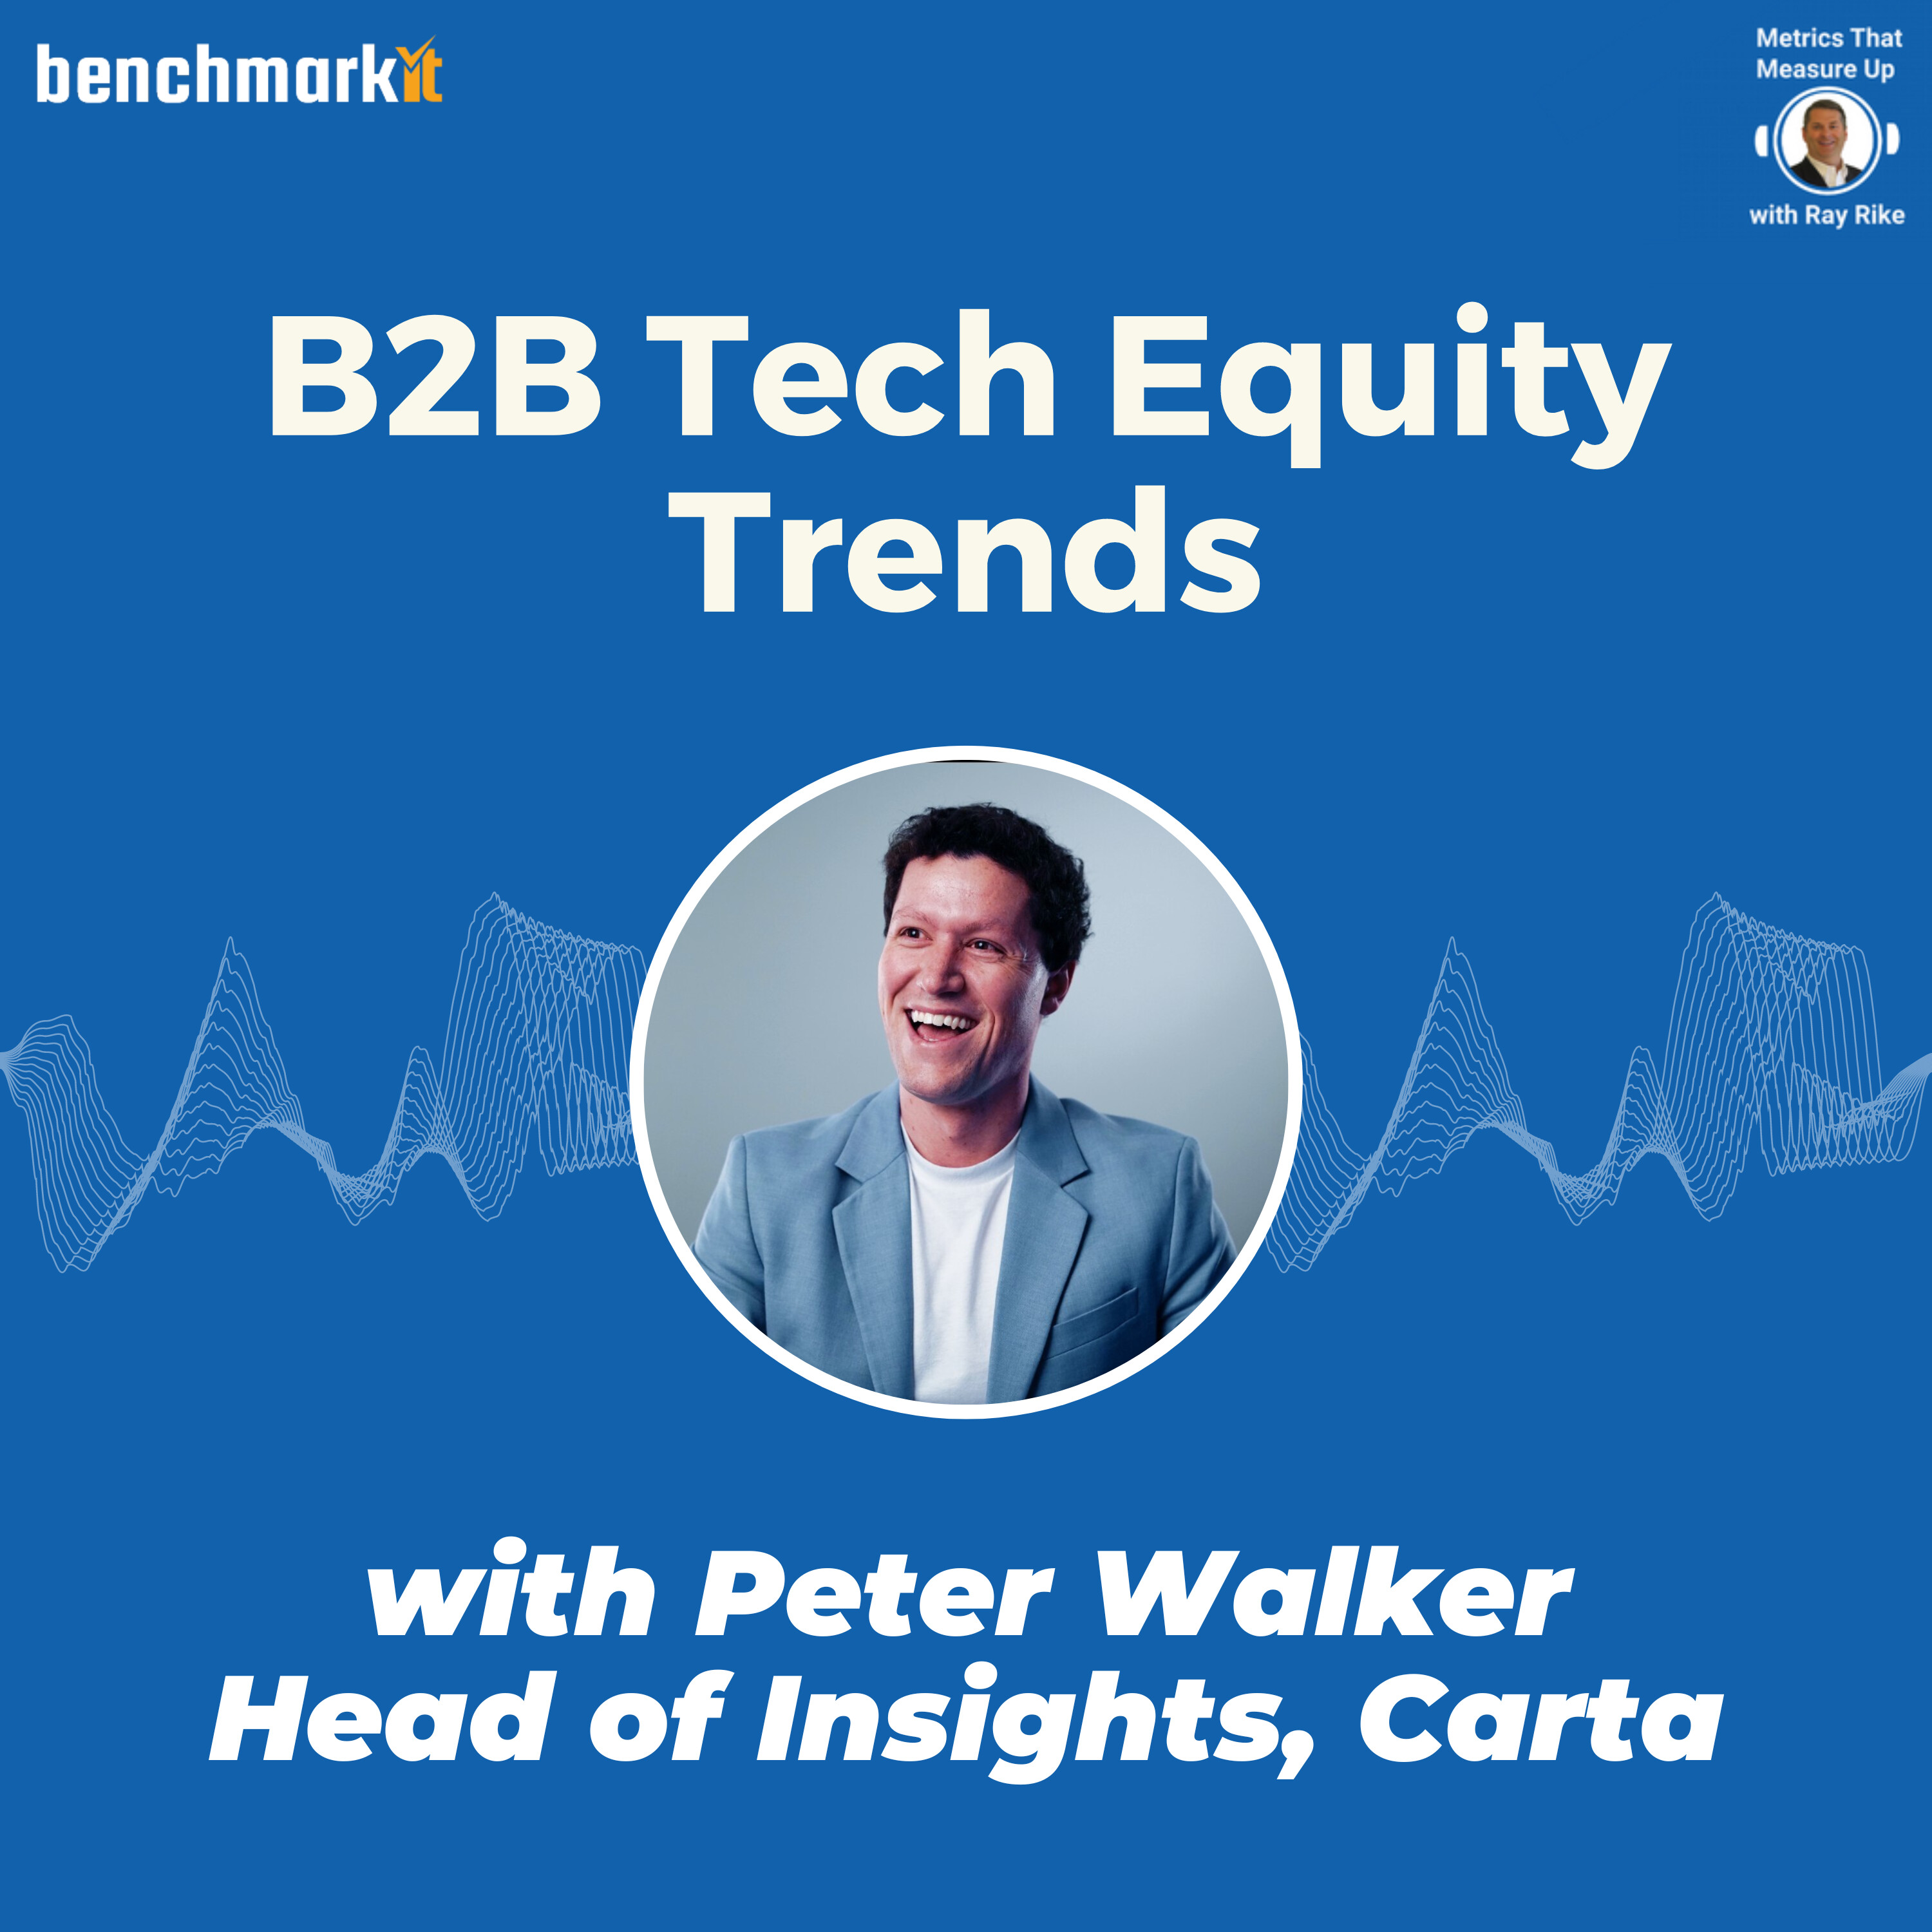 B2B Technology Equity Trends - with Peter Walker, Head of Insights Carta